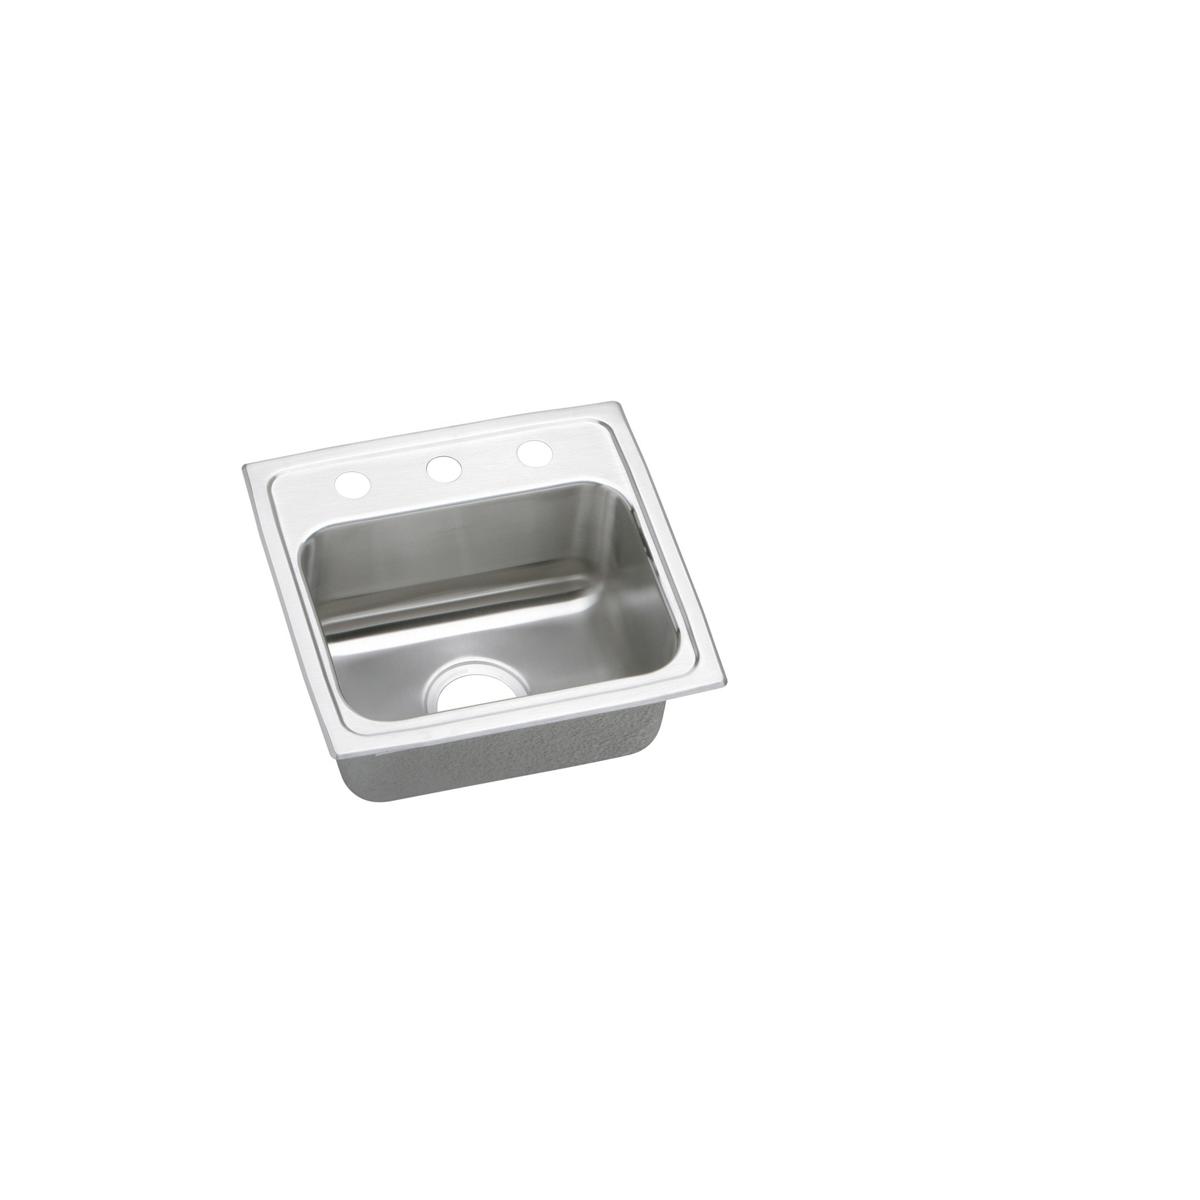 Elkay Lustertone Classic 17" x 16" x 5-1/2" MR2-Hole Single Bowl Drop-in ADA Sink with Quick-clip